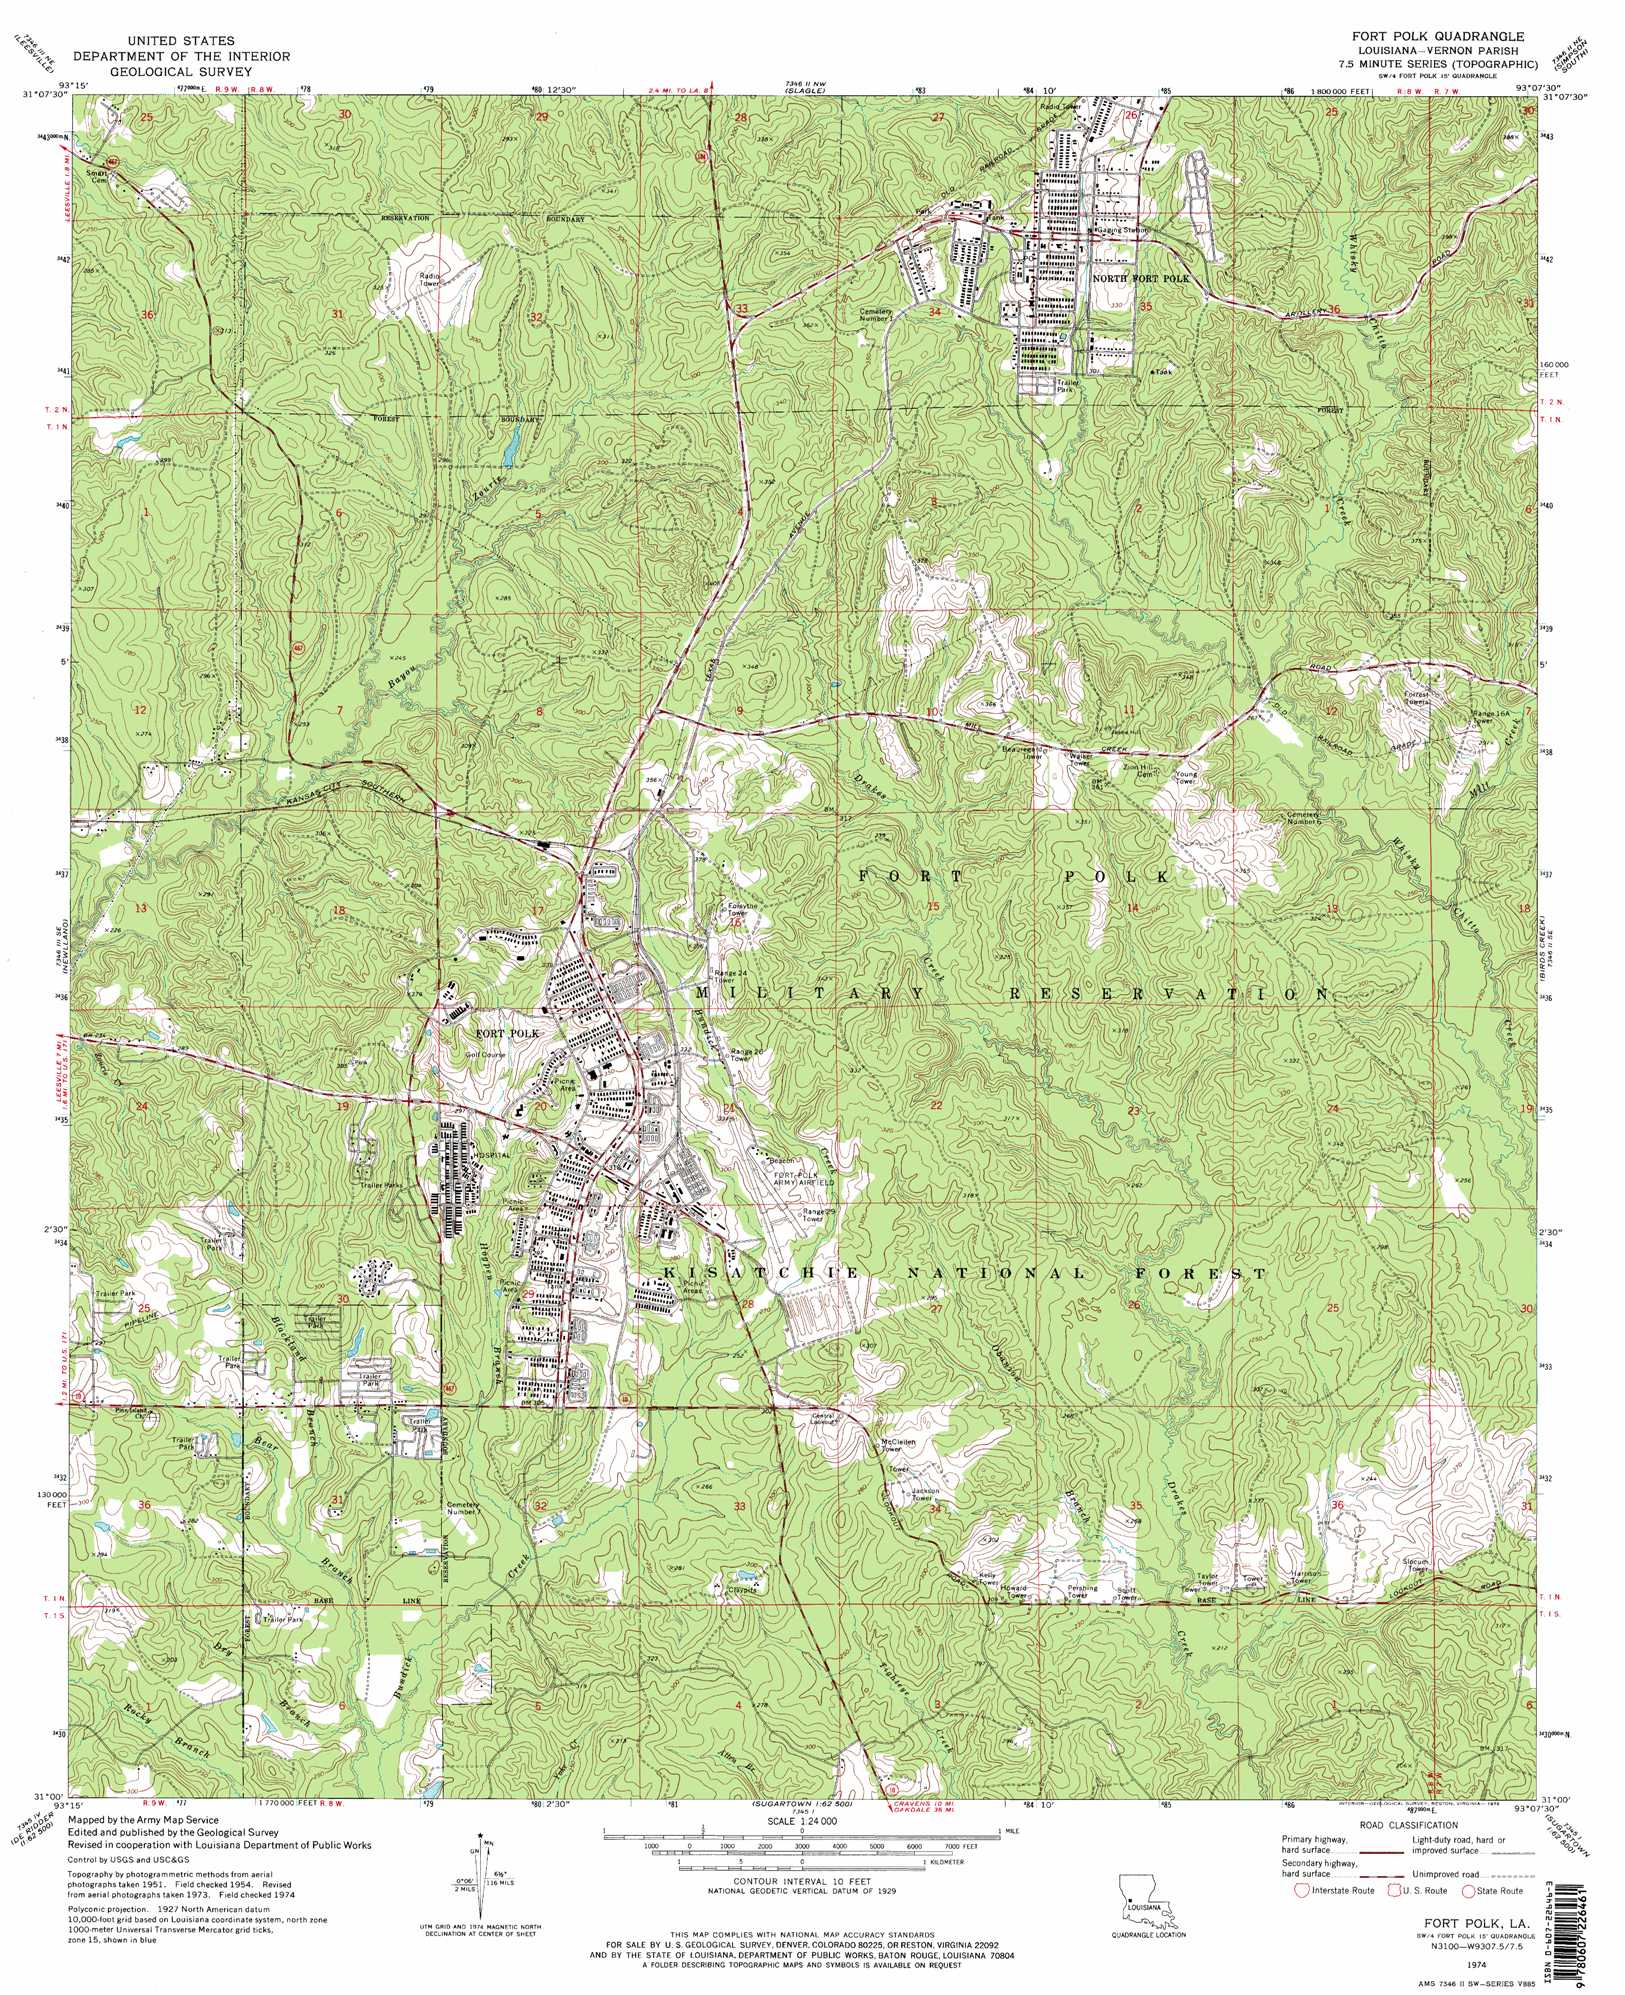 Buy this Fort Polk topo map as a high-resolution digital map file on DVD: